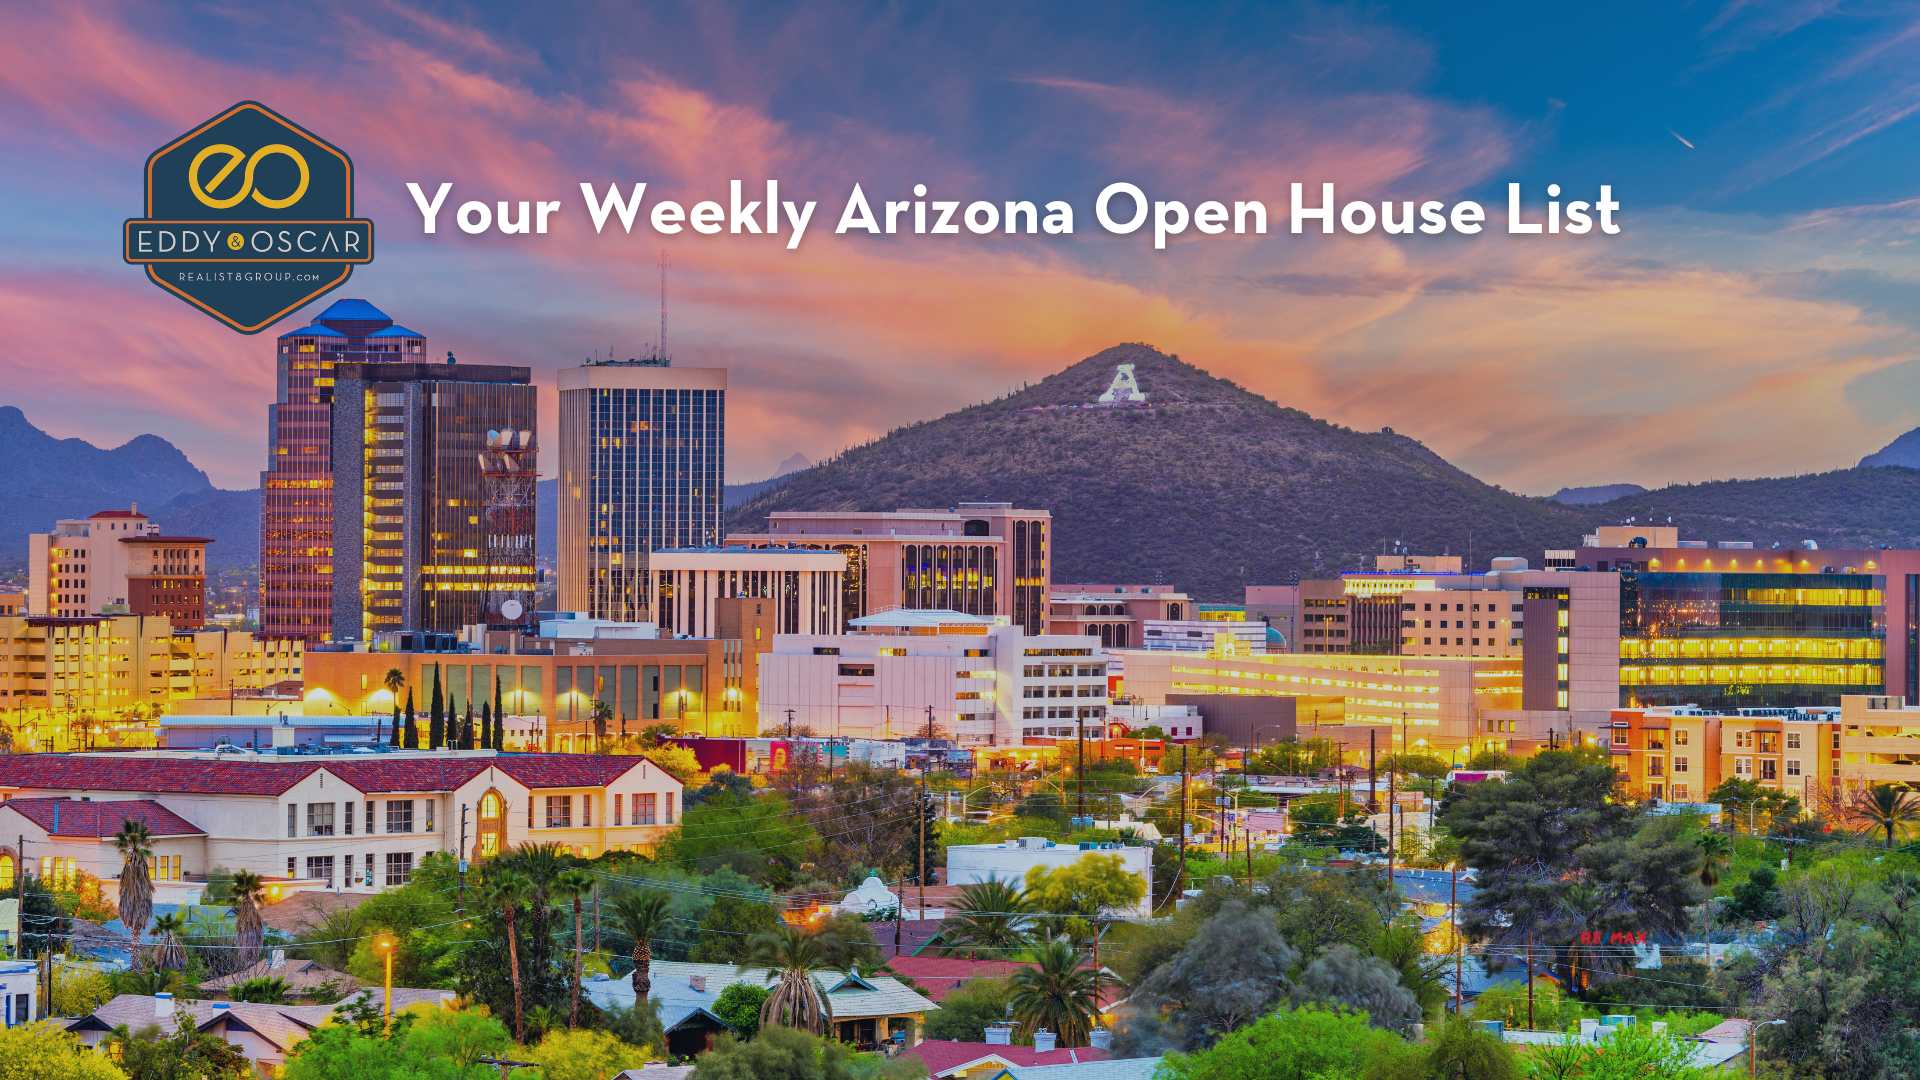 Want to view some Open Houses in Arizona?